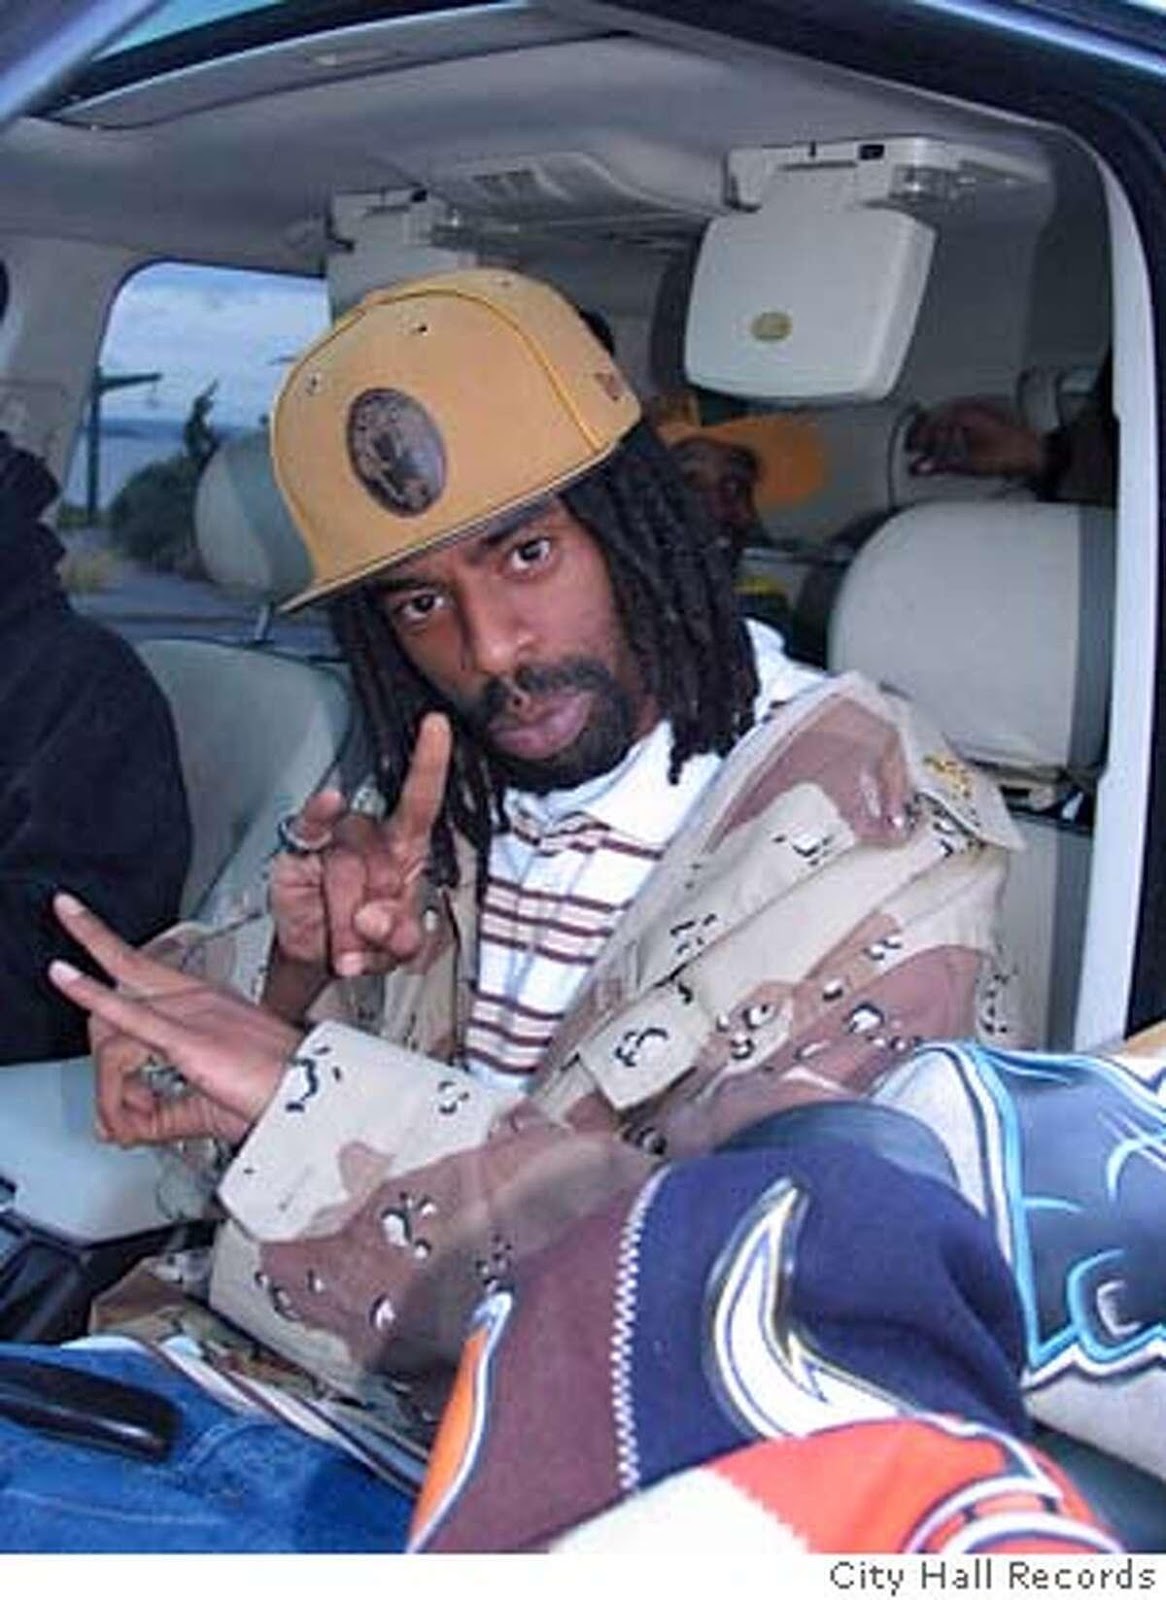 A deadly tale of underground rap / Vallejo's Mac Dre was slain in a dispute  over money -- rumors led to reprisal and 3 more killings, police say